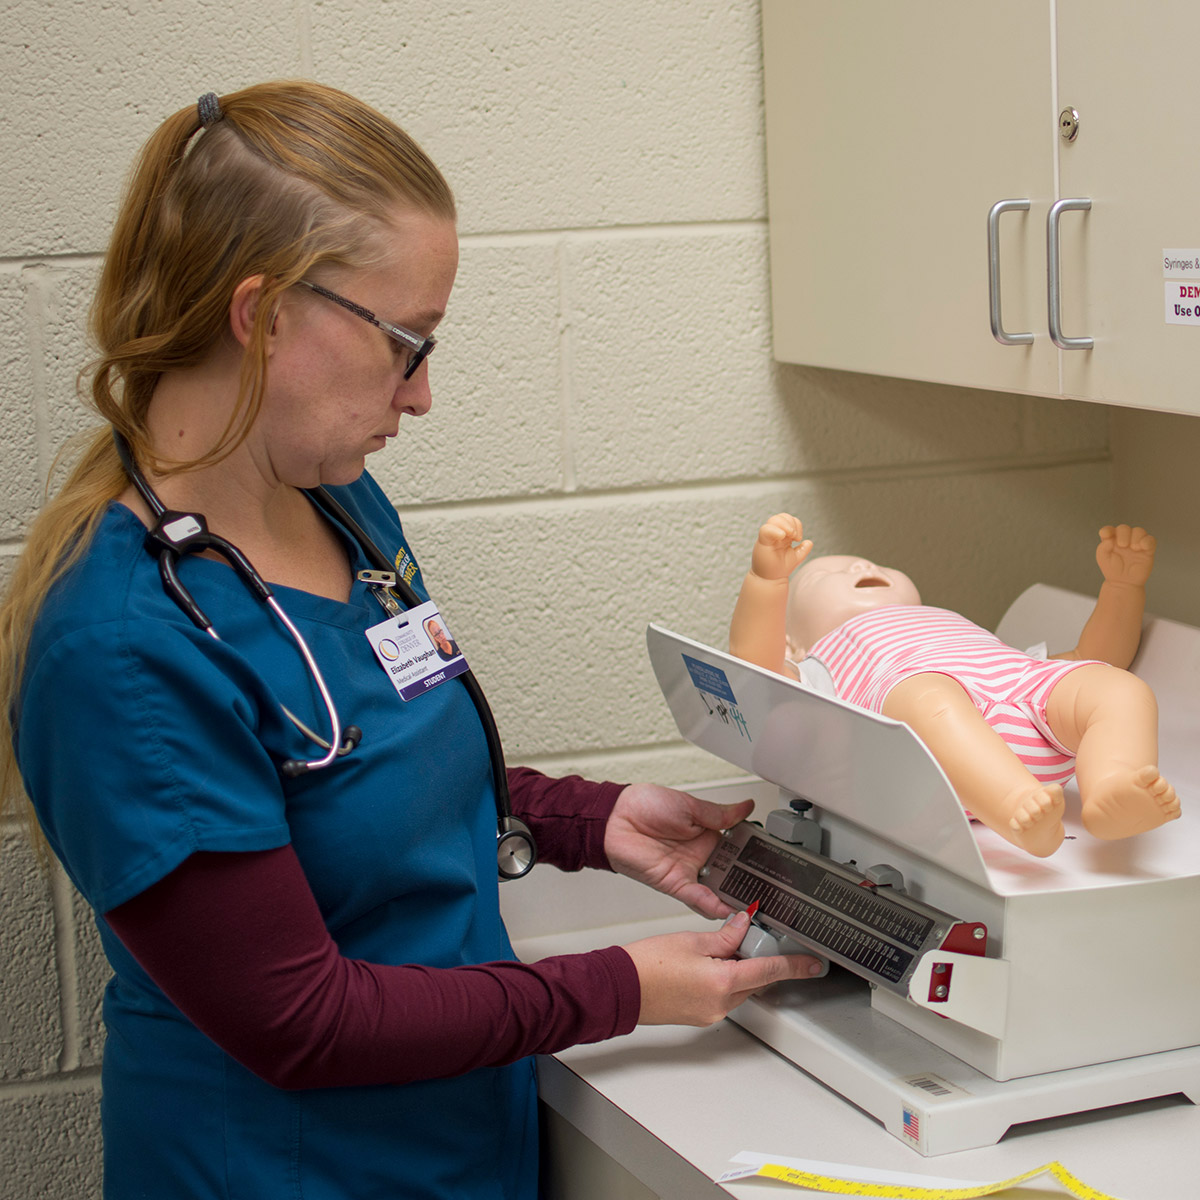 CCD Medical Assistant student weighing a baby dummy